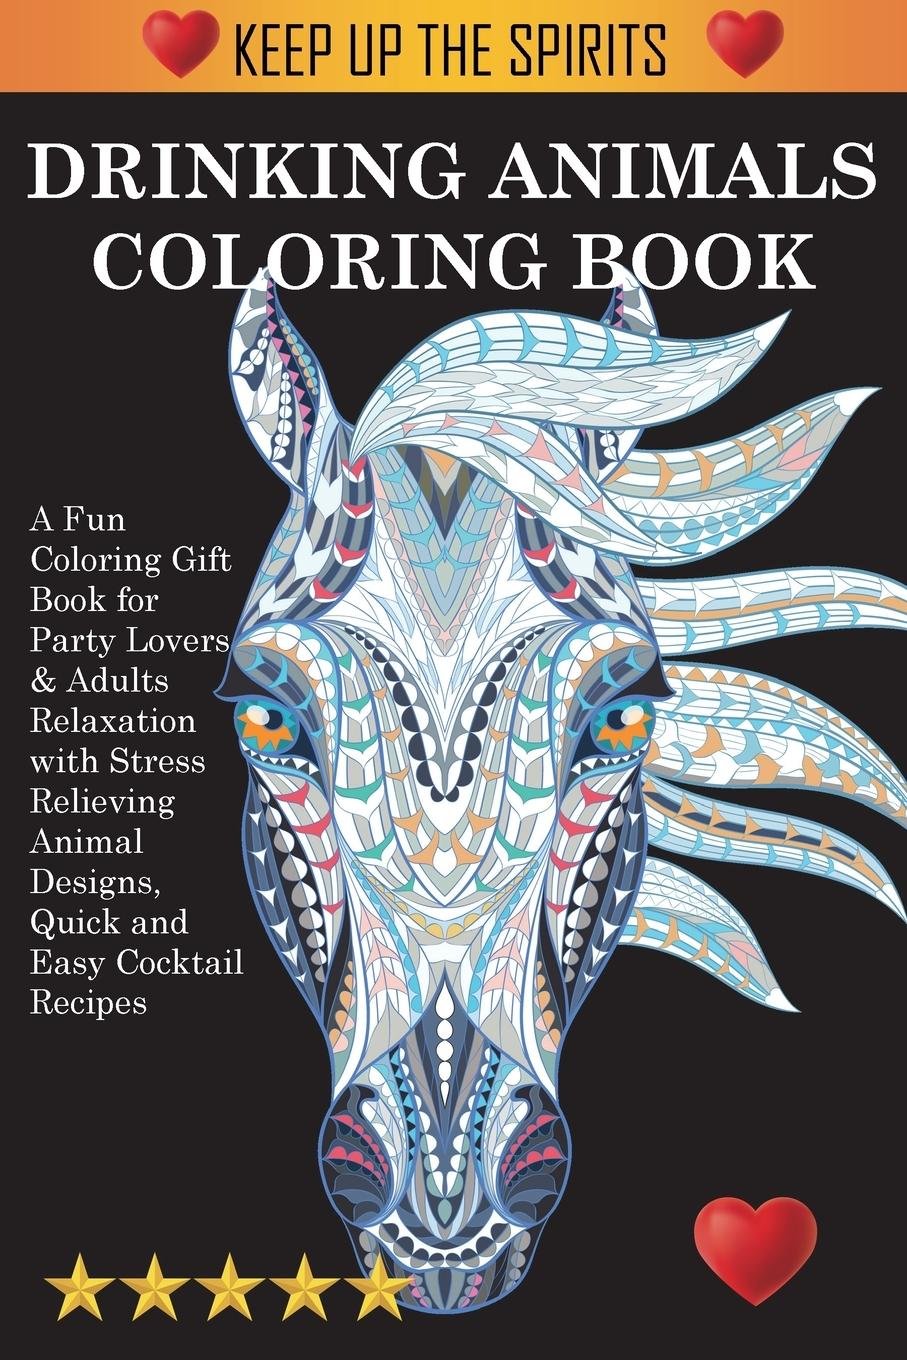 Adult Coloring Books Coloring Books For Adults Colouring Books ...